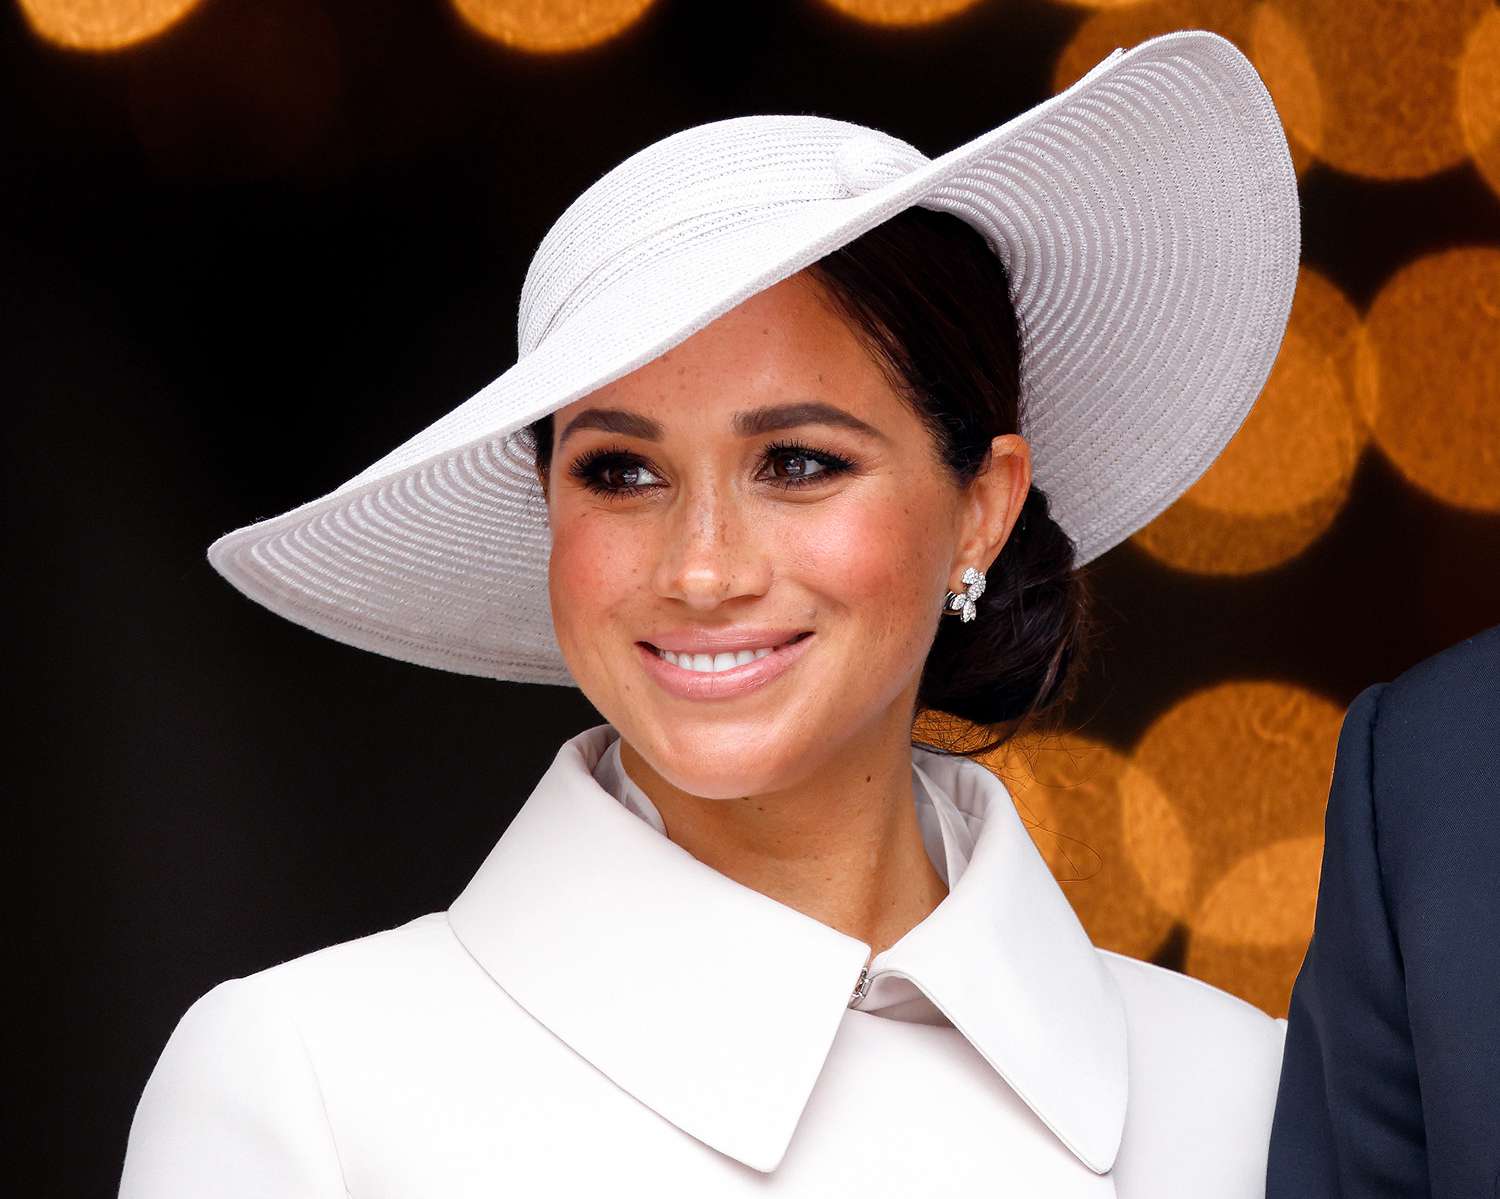 Meghan, Duchess of Sussex attends a National Service of Thanksgiving to celebrate the Platinum Jubilee of Queen Elizabeth II at St Paul's Cathedral on June 3, 2022 in London, England. The Platinum Jubilee of Elizabeth II is being celebrated from June 2 to June 5, 2022, in the UK and Commonwealth to mark the 70th anniversary of the accession of Queen Elizabeth II on 6 February 1952.